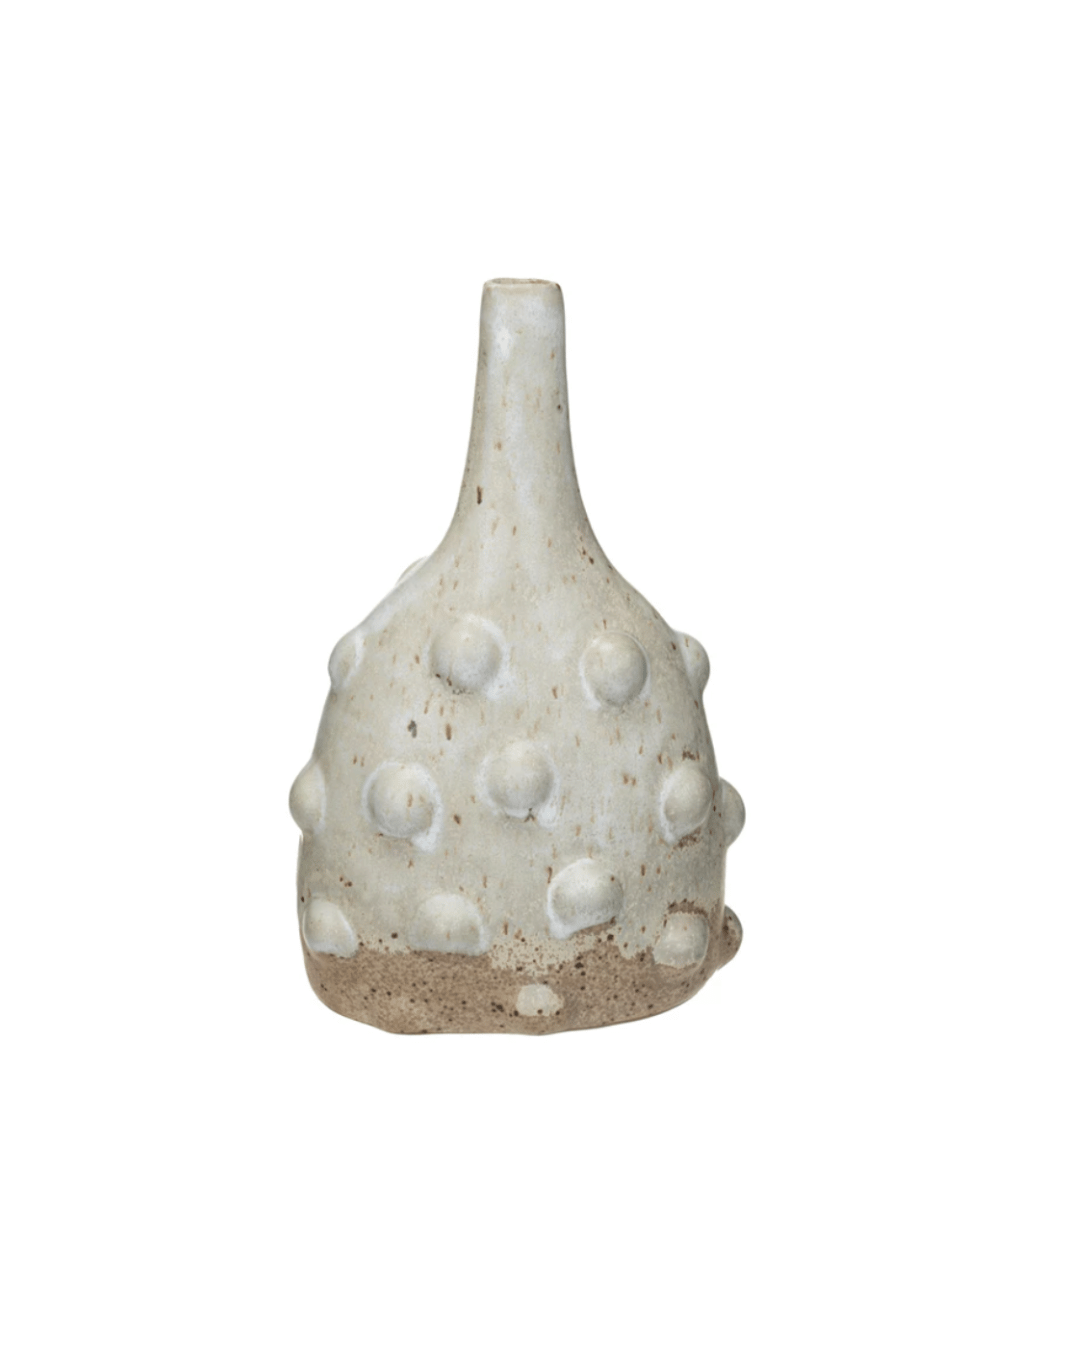 An image of a textured ceramic Dot Vase with a bulbous body and raised dot pattern, blending from a sandy base to a pale glazed top, reminiscent of Scottsdale Arizona aesthetic by Creative Co-op.